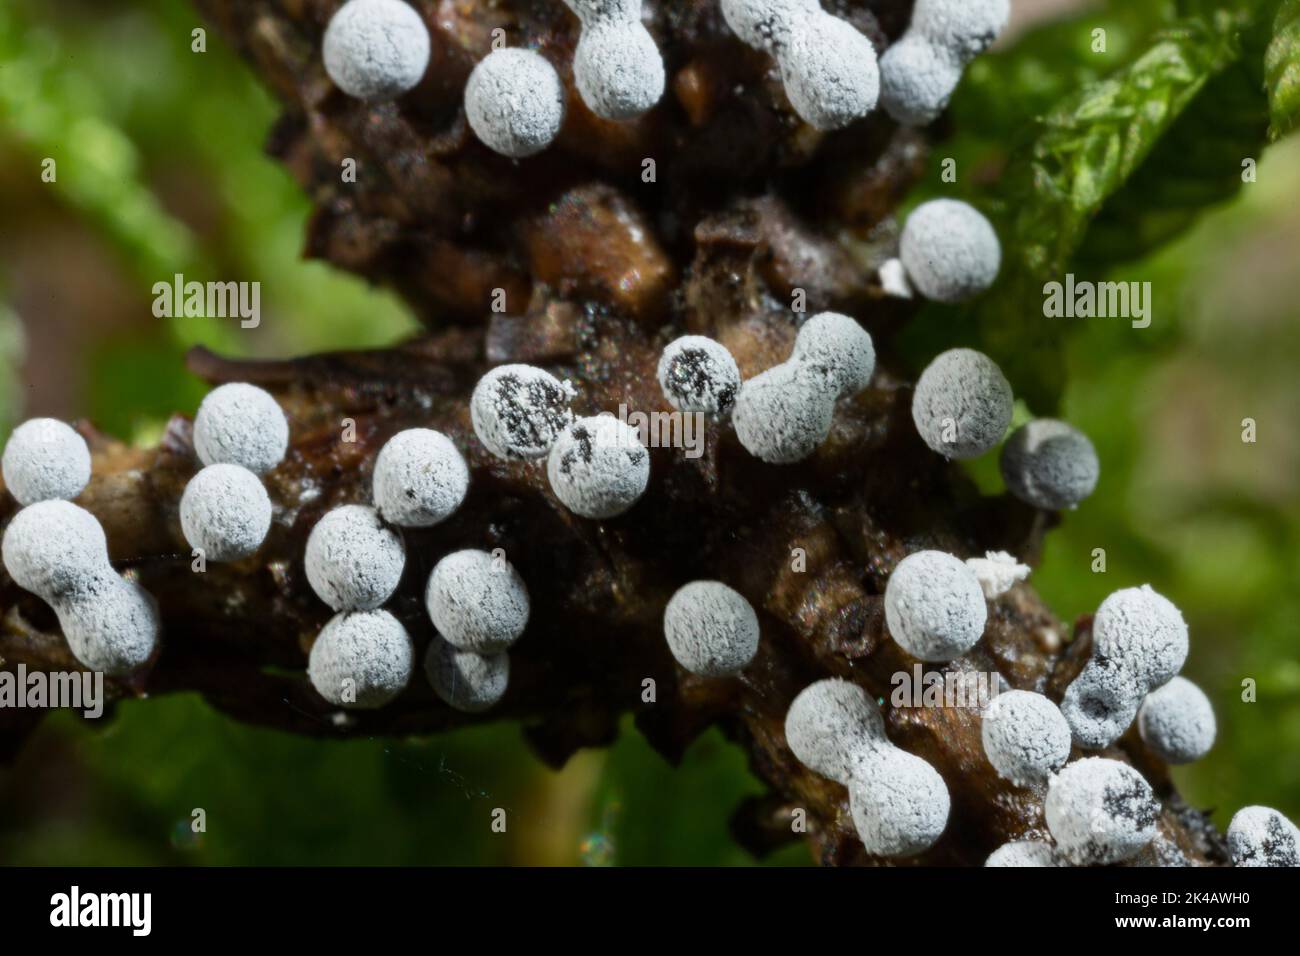 Grey globe slime mould several spherical greyish fruiting bodies next to each other on branches Stock Photo